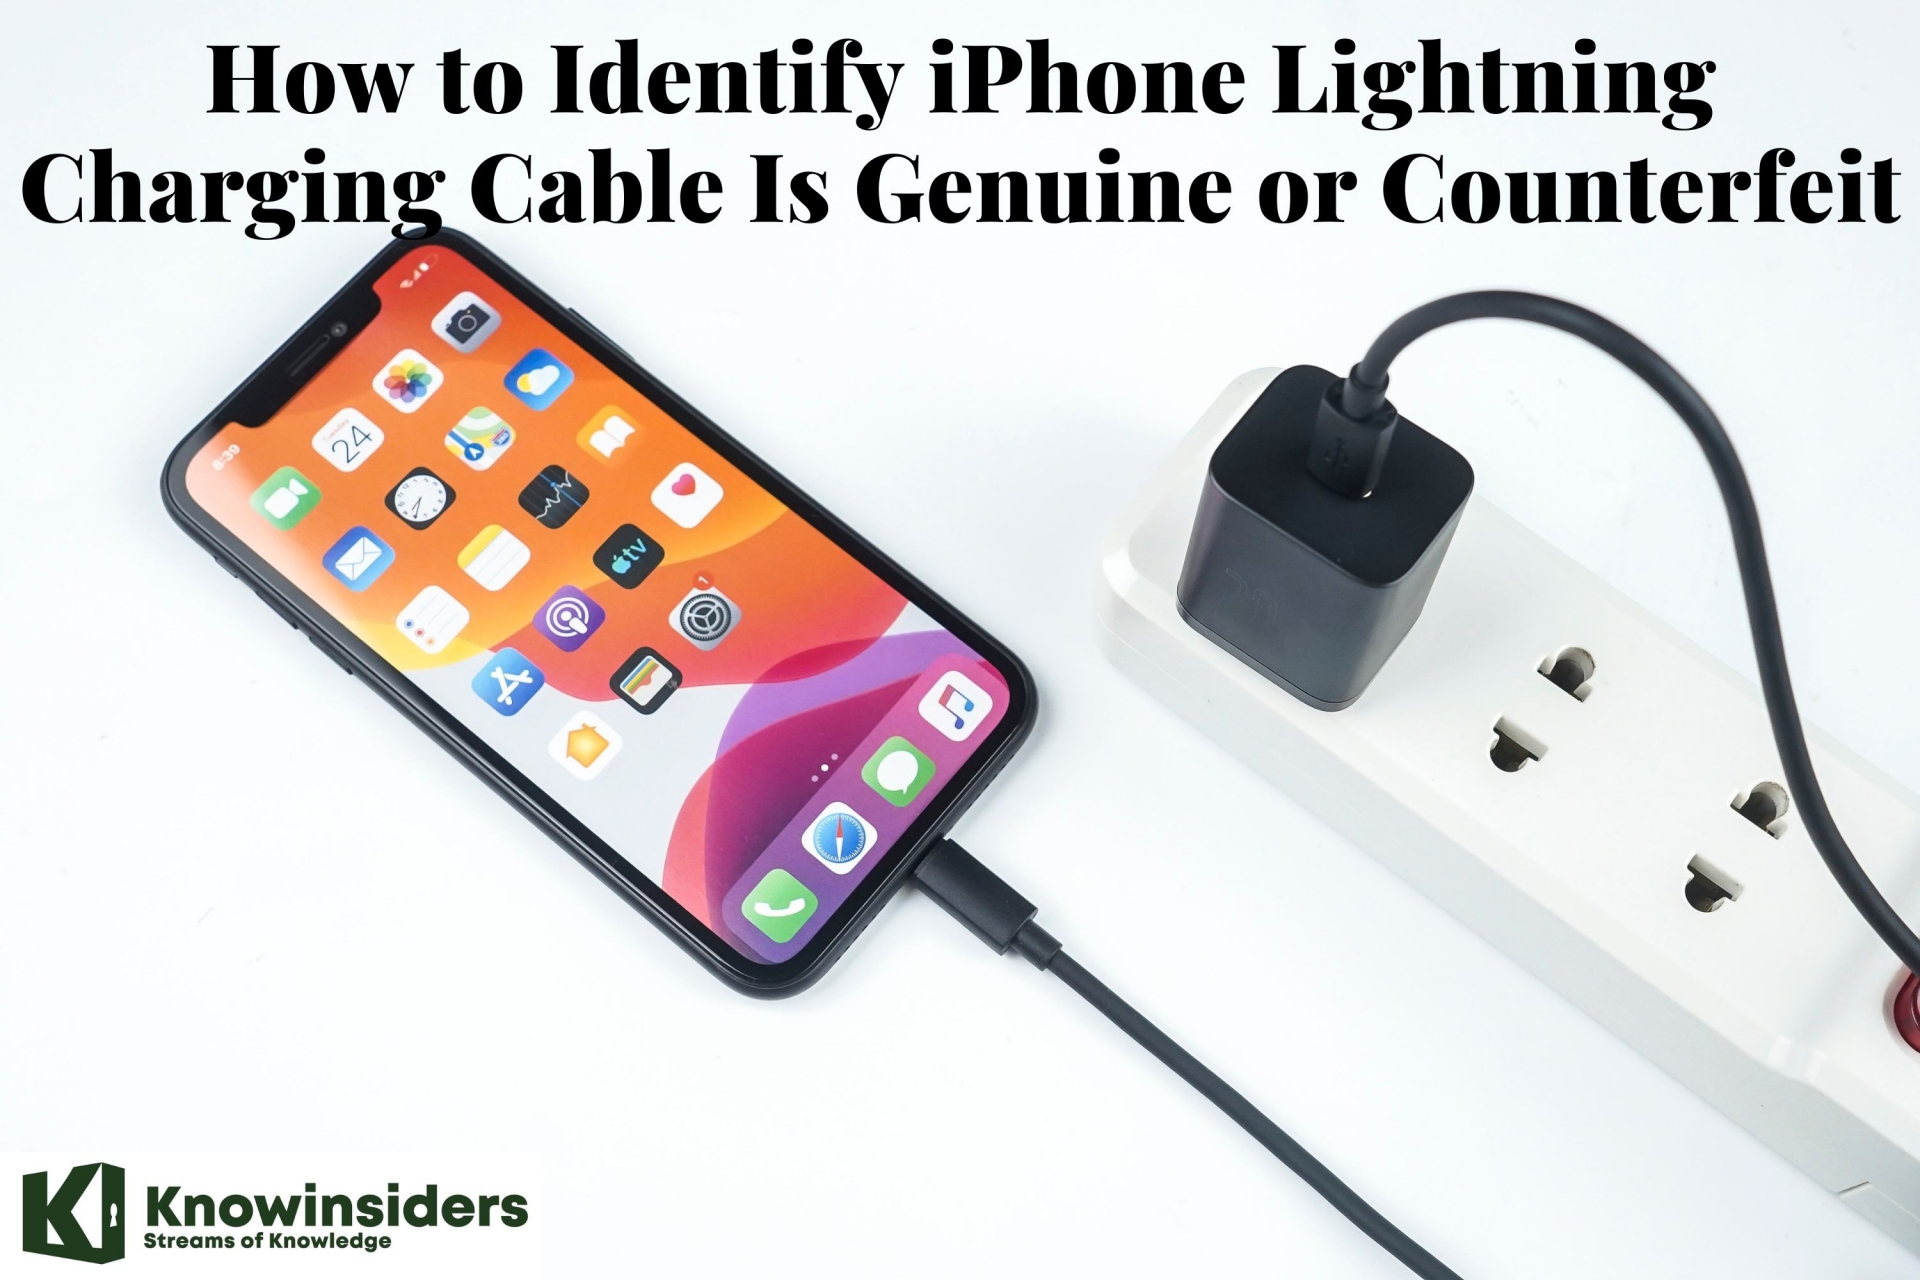 How to Identify iPhone Lightning Charging Cable Is Genuine or Counterfeit